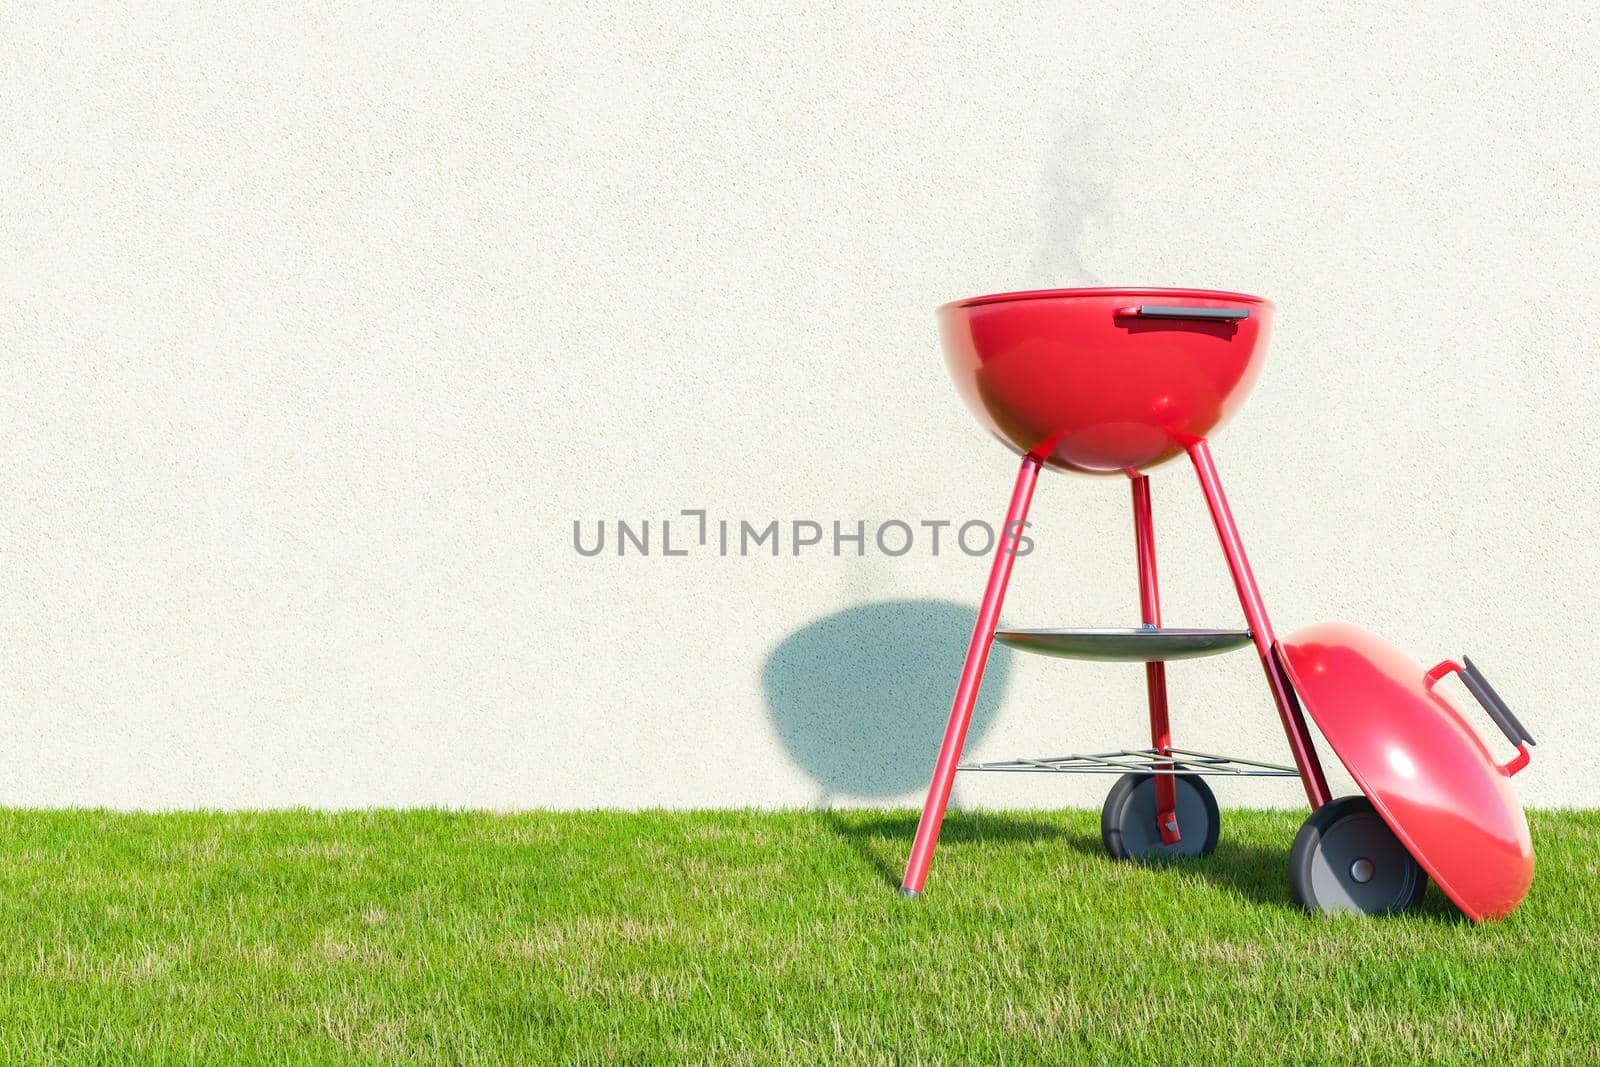 3D rendering of modern portable metal red grill oven with smoke placed on grassy lawn near white wall on sunny summer day during picnic